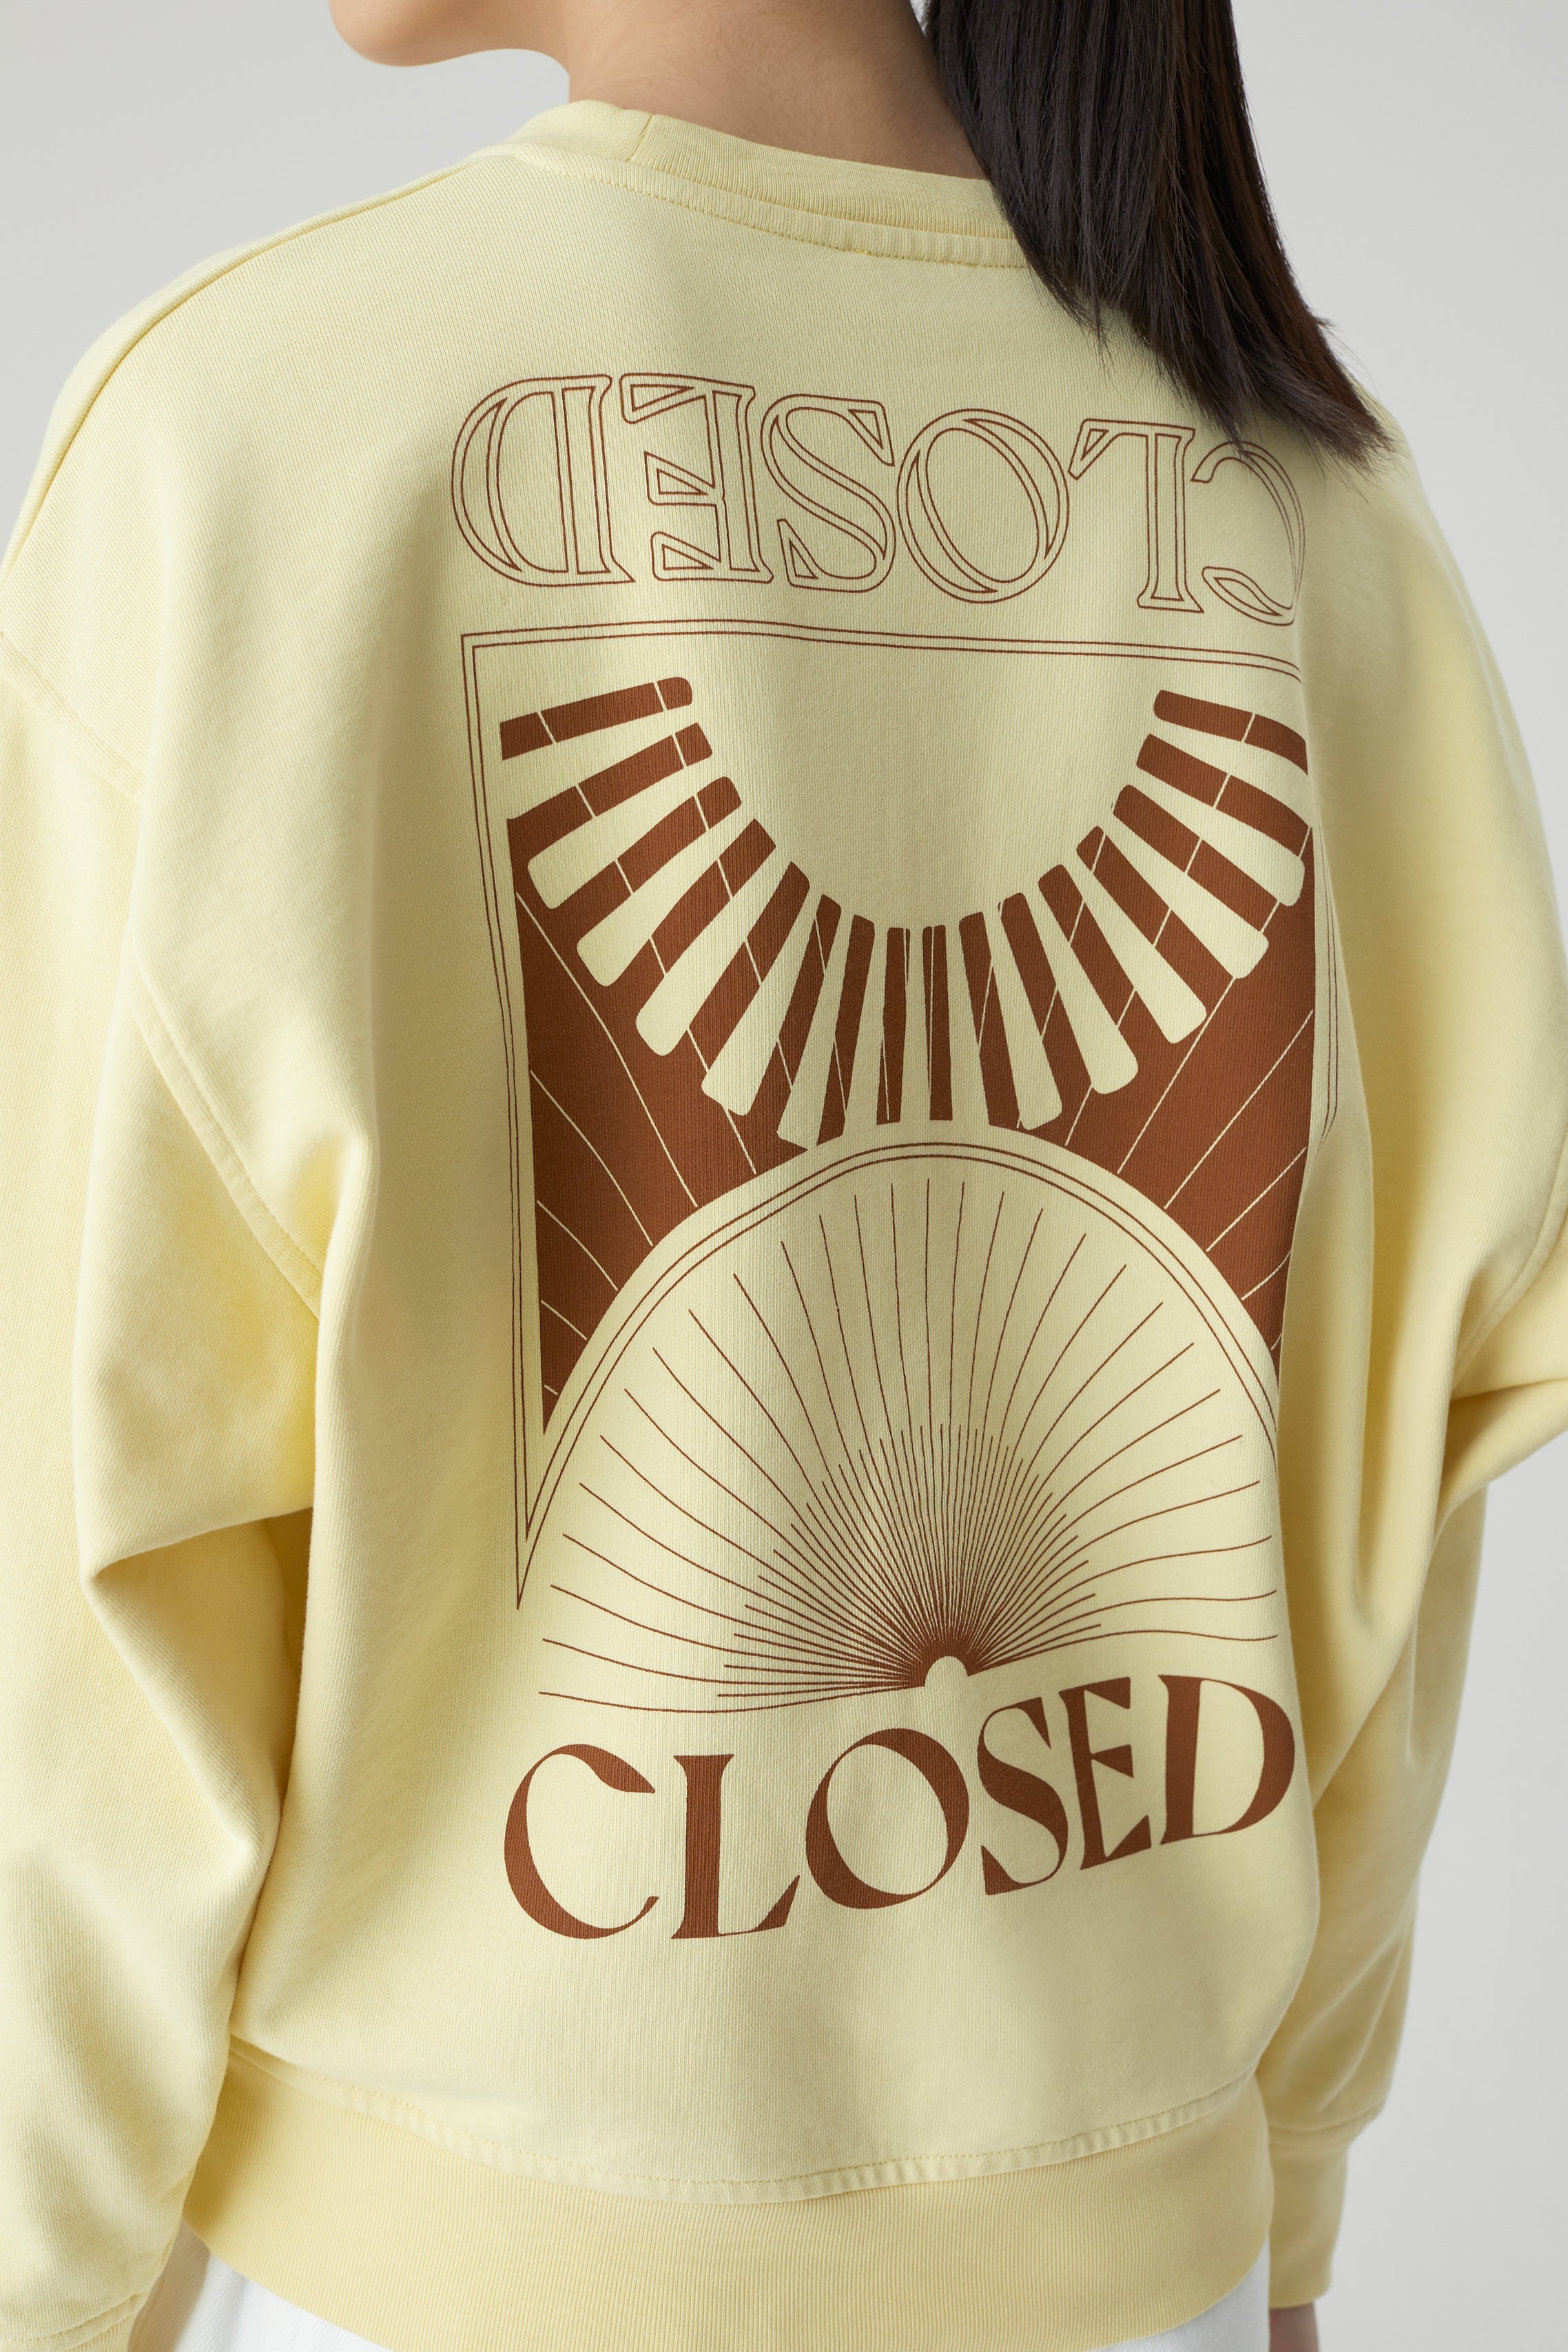 CLOSED-OUTLET-SALE-PRINTED-CREWNECK-T-SHIRTS-Strick-ARCHIVE-COLLECTION-2.jpg